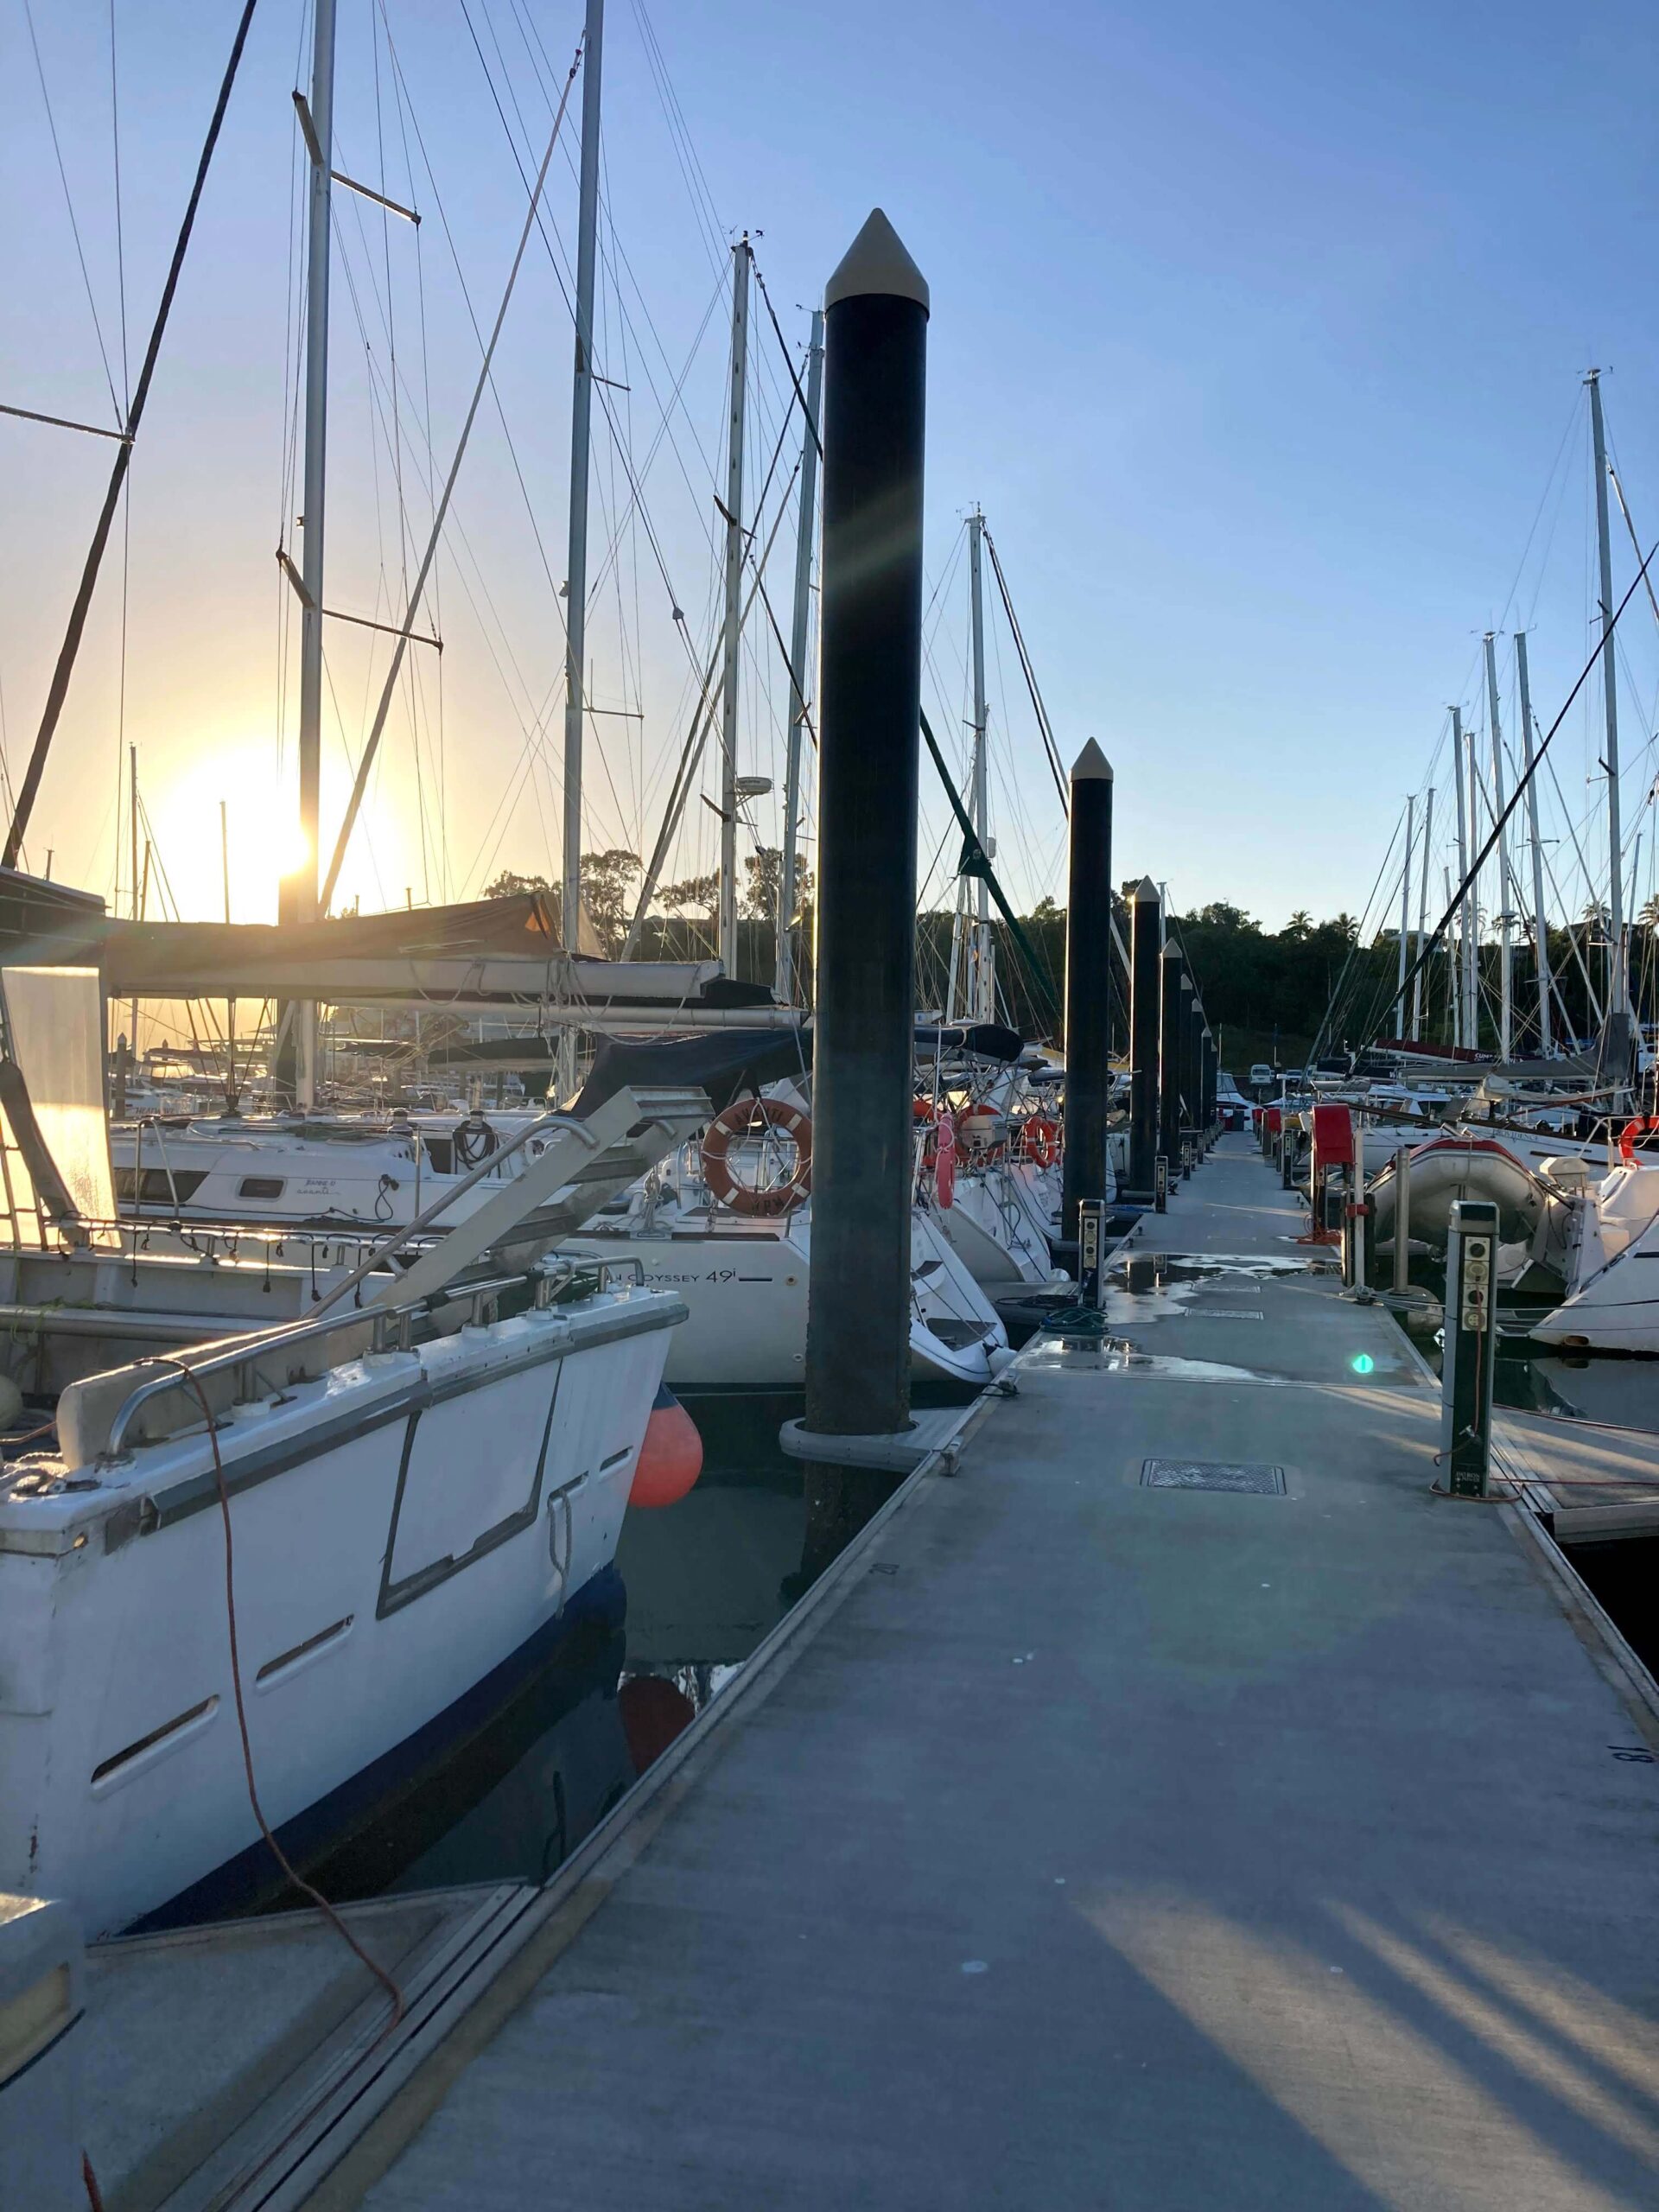 The Coral Sea Marina. Photo taken by Toby.